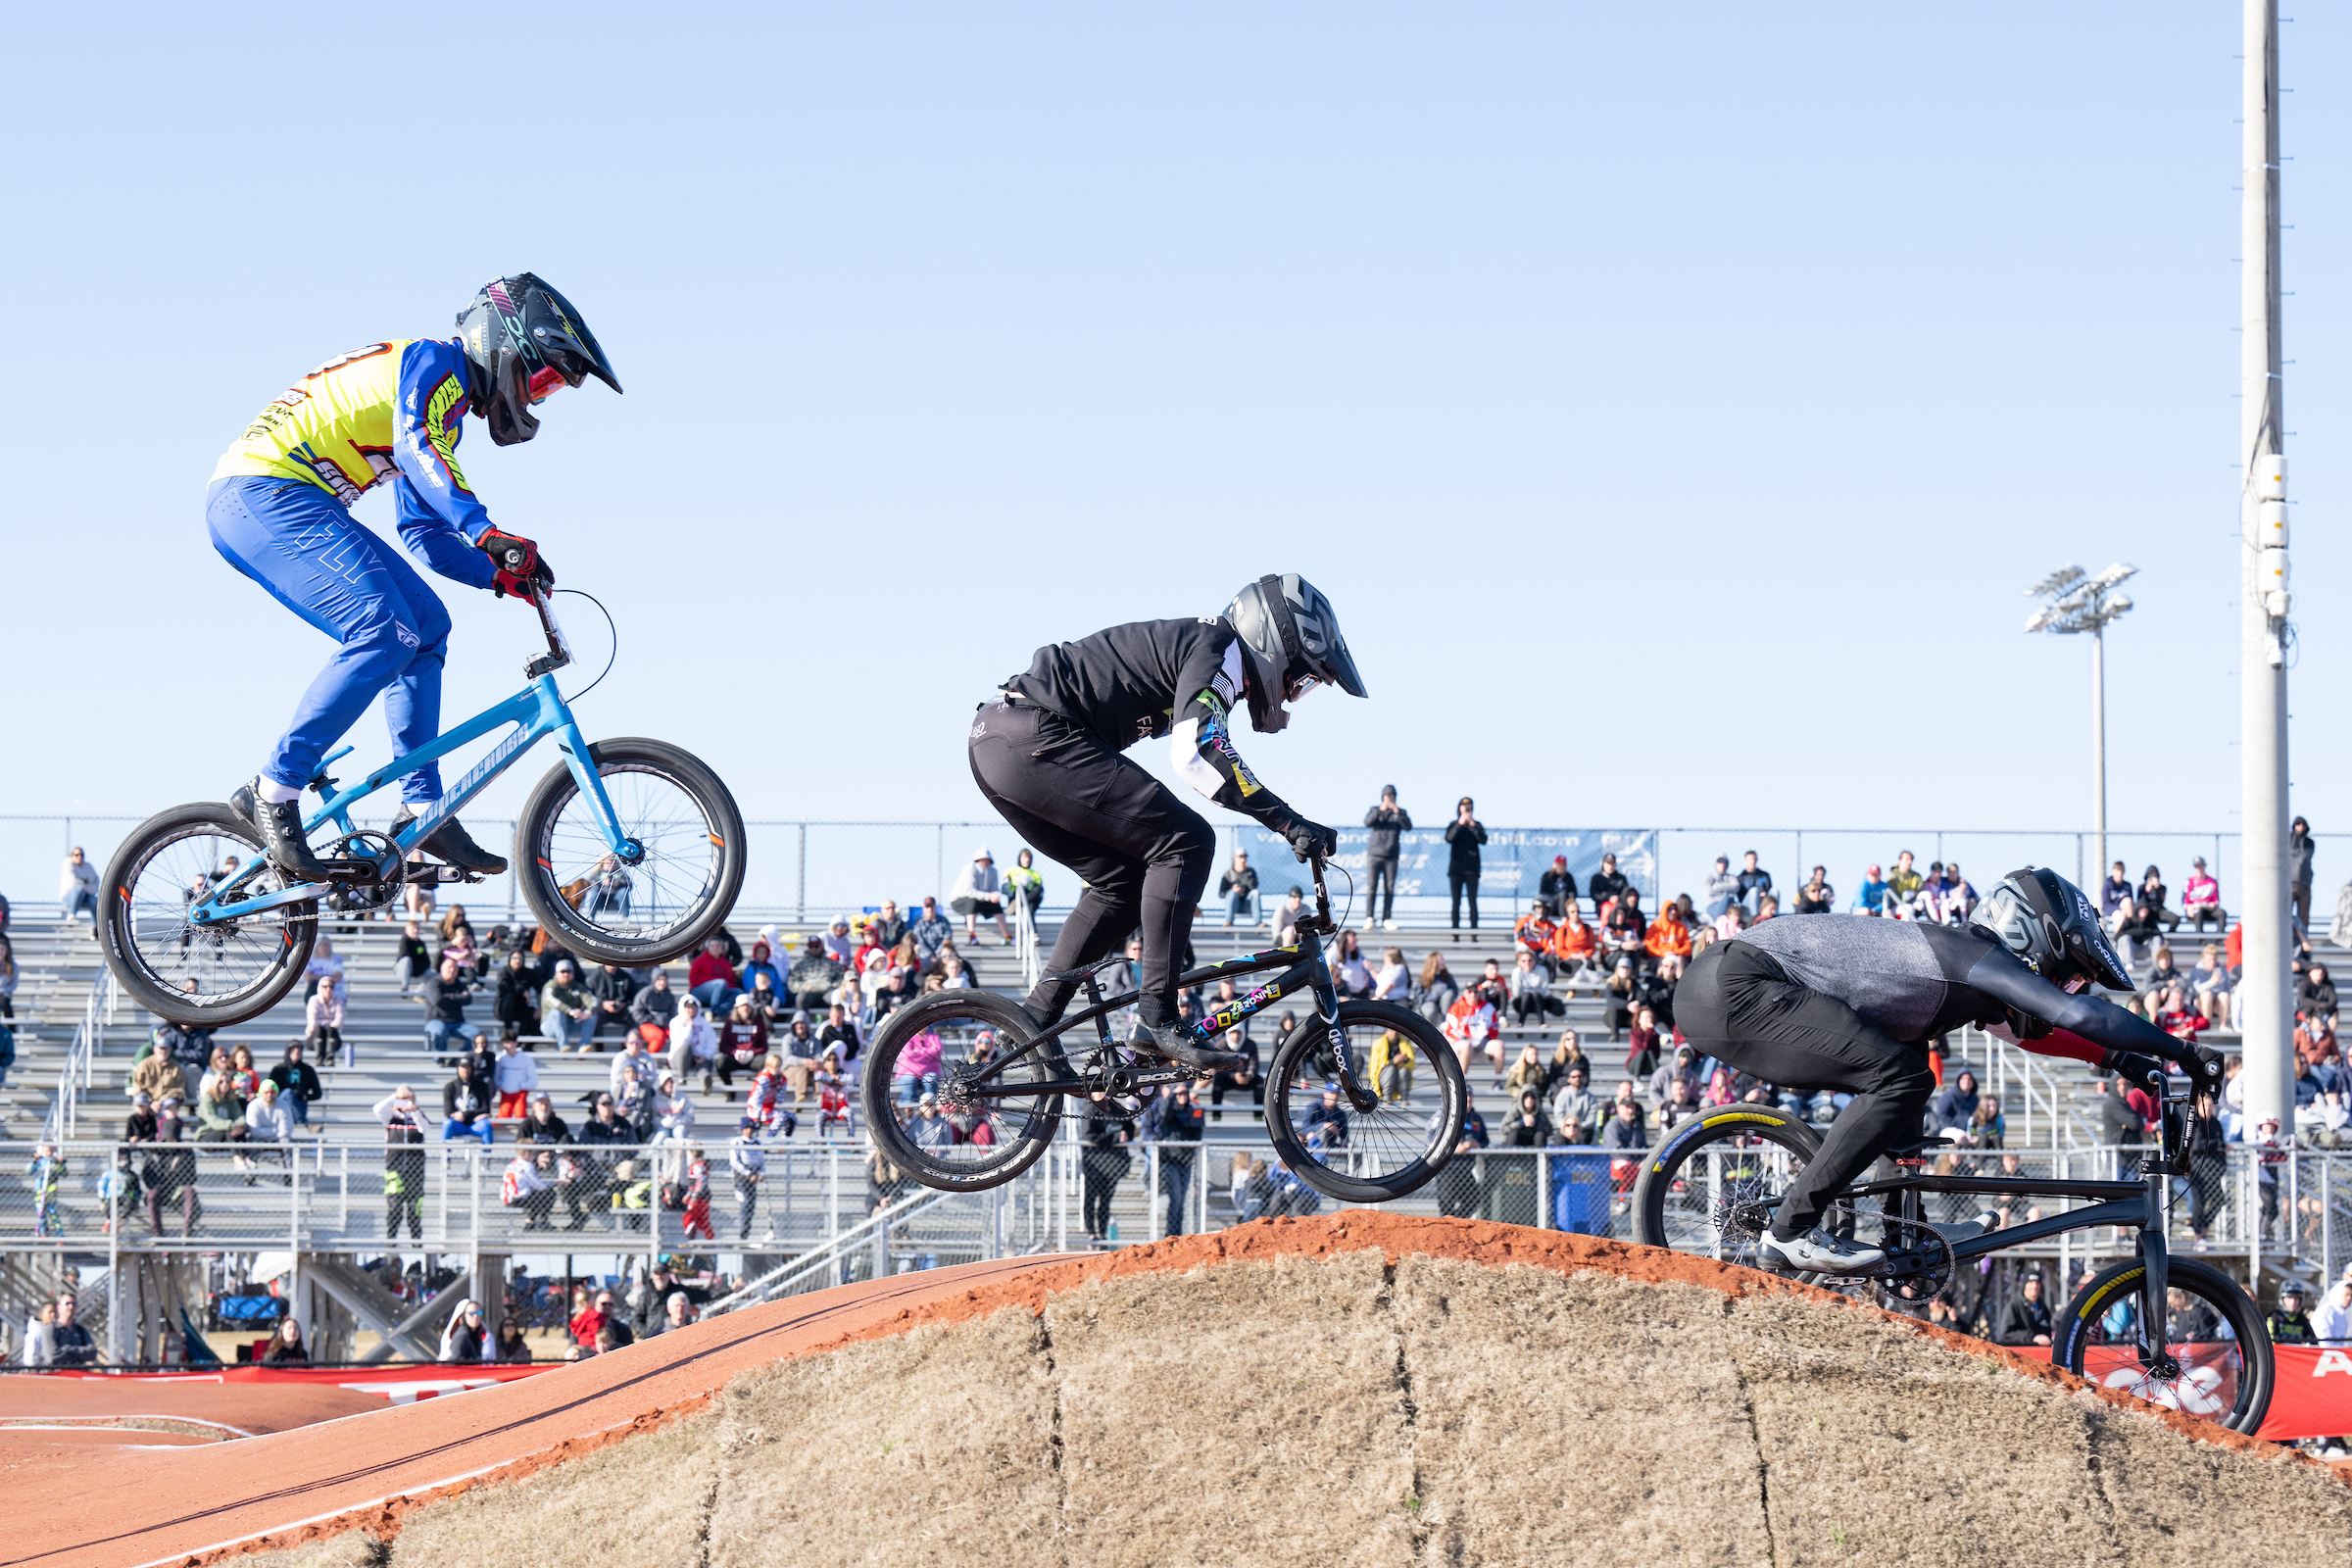 Scenes from the 2022 BMX USA Nationals in Rock Hill, South Carolina.